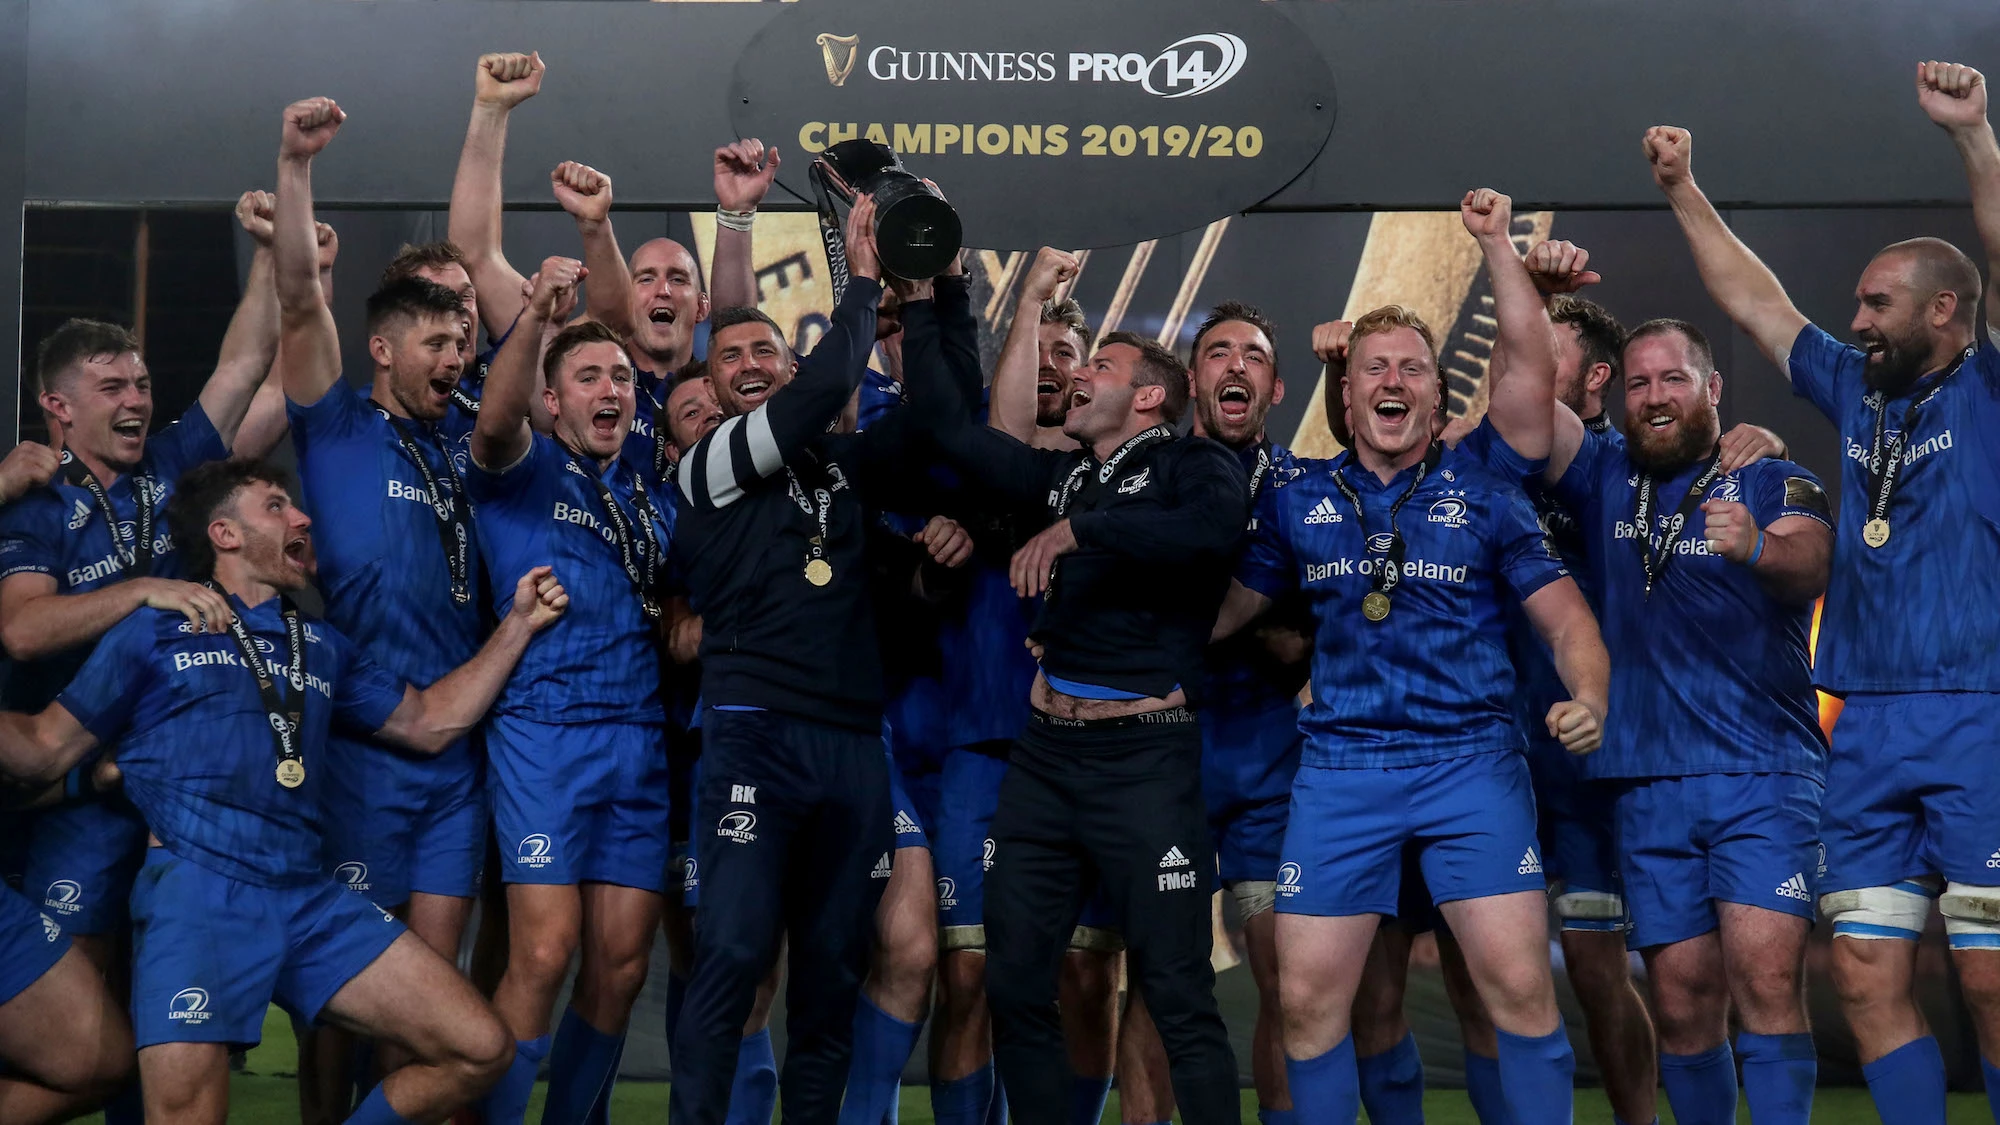 Rob Kearney and Fergus McFadden lift the Guinness PRO14 trophy as Leinster are crowned champions 12/9/2020